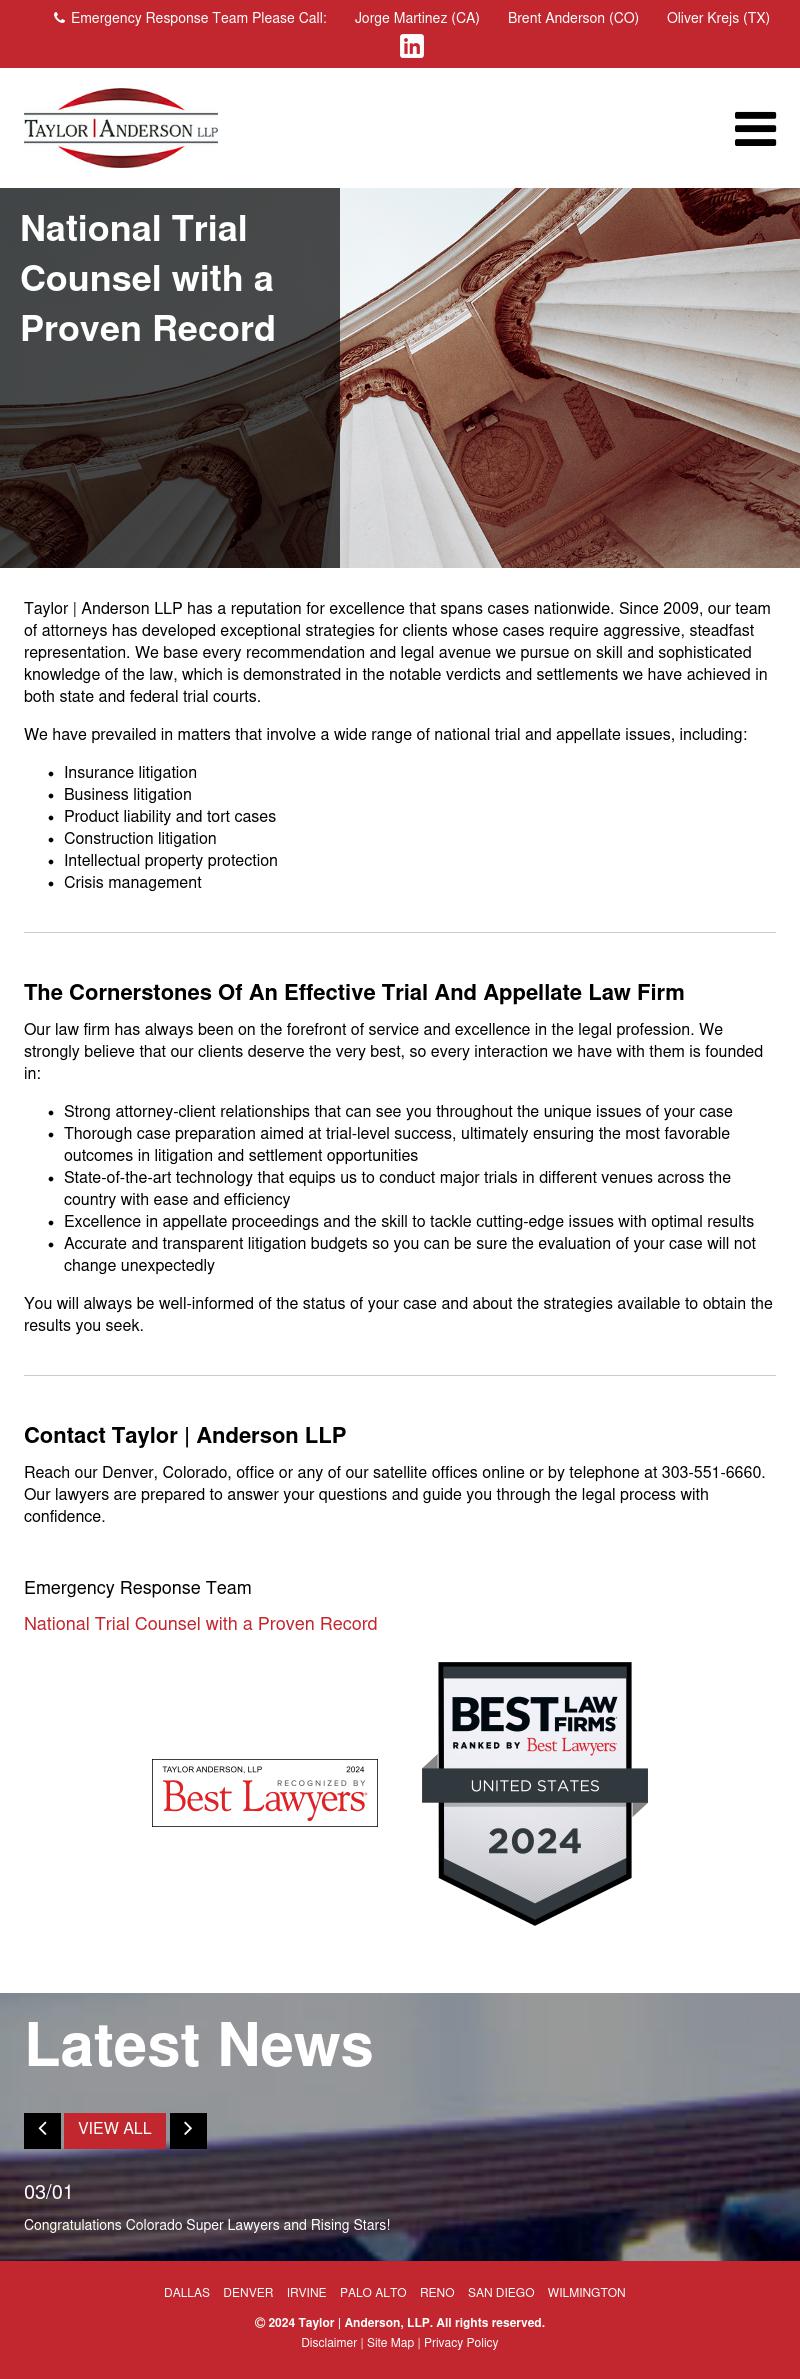 Taylor | Anderson, LLP - San Diego CA Lawyers